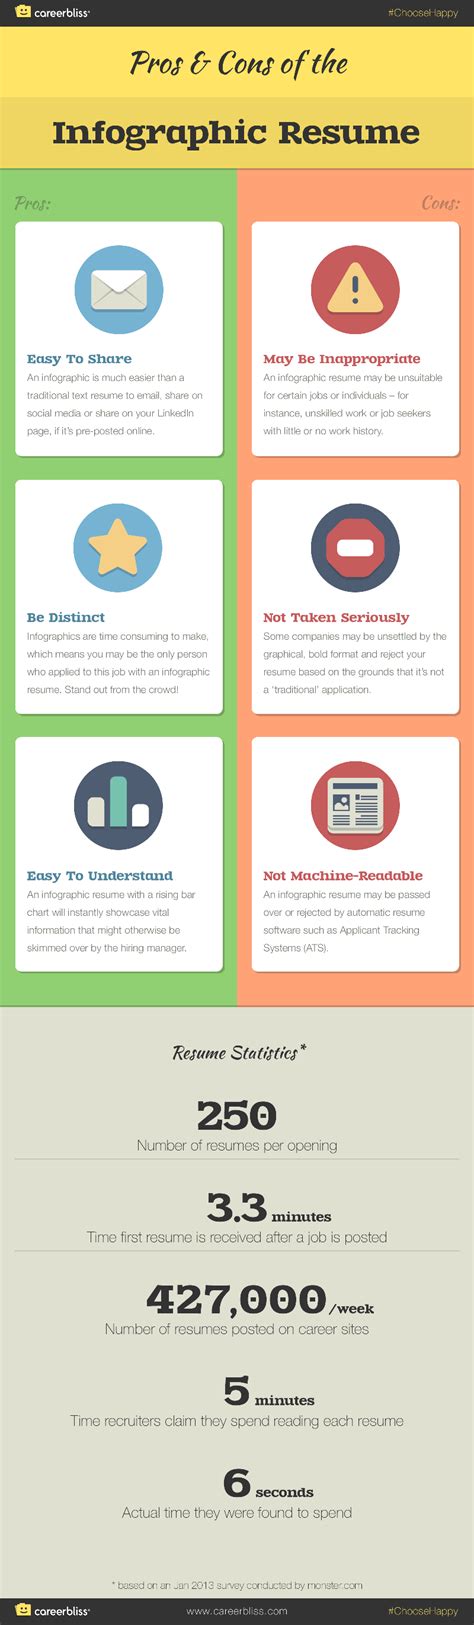 Resume Tip Tuesday Pros And Cons Of The Infographic